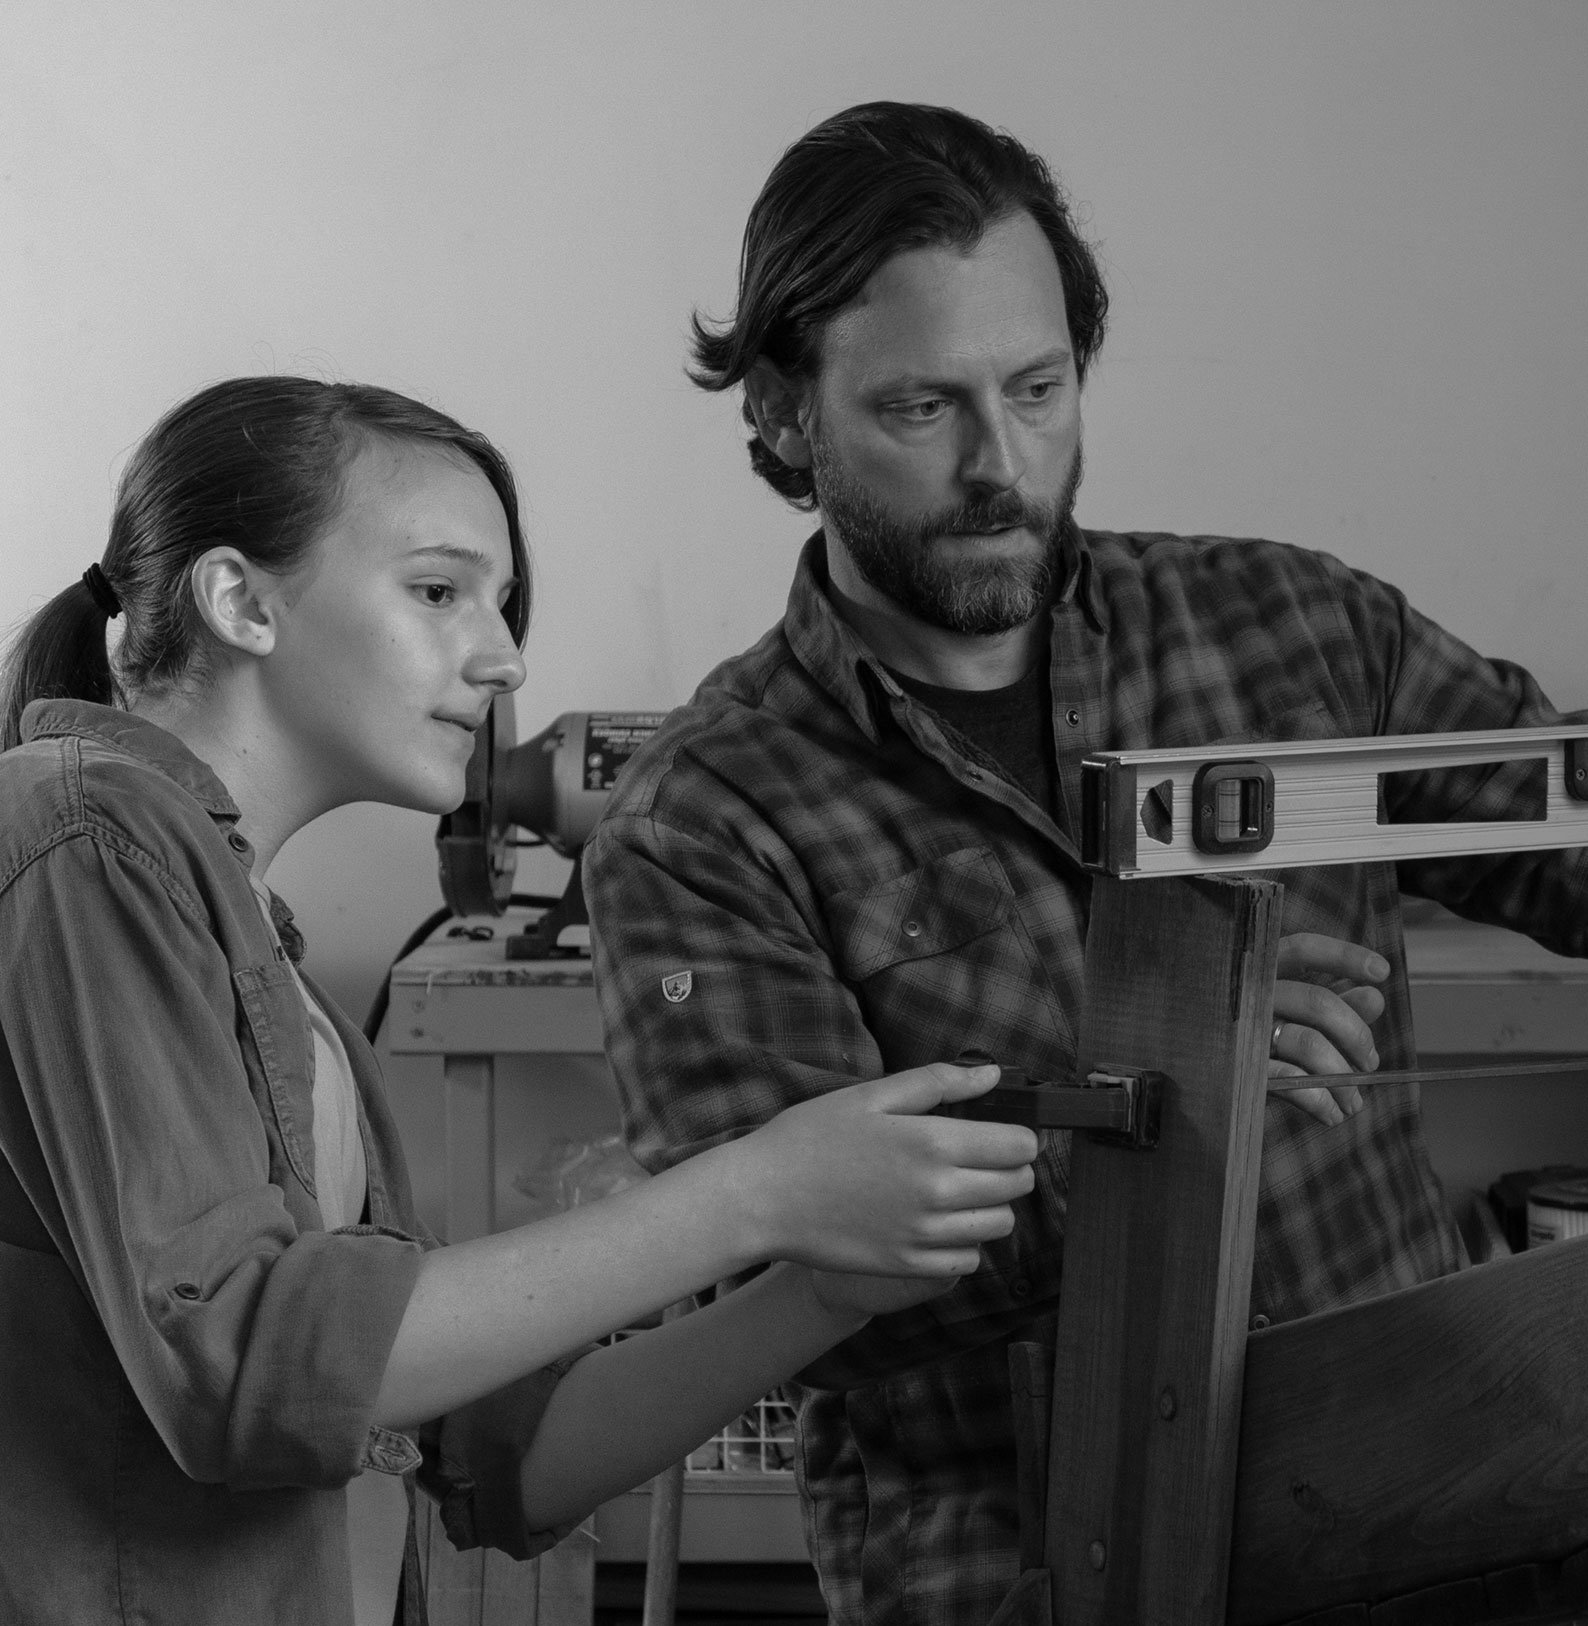 Man using a level on a wood project and a young woman helping adjust.